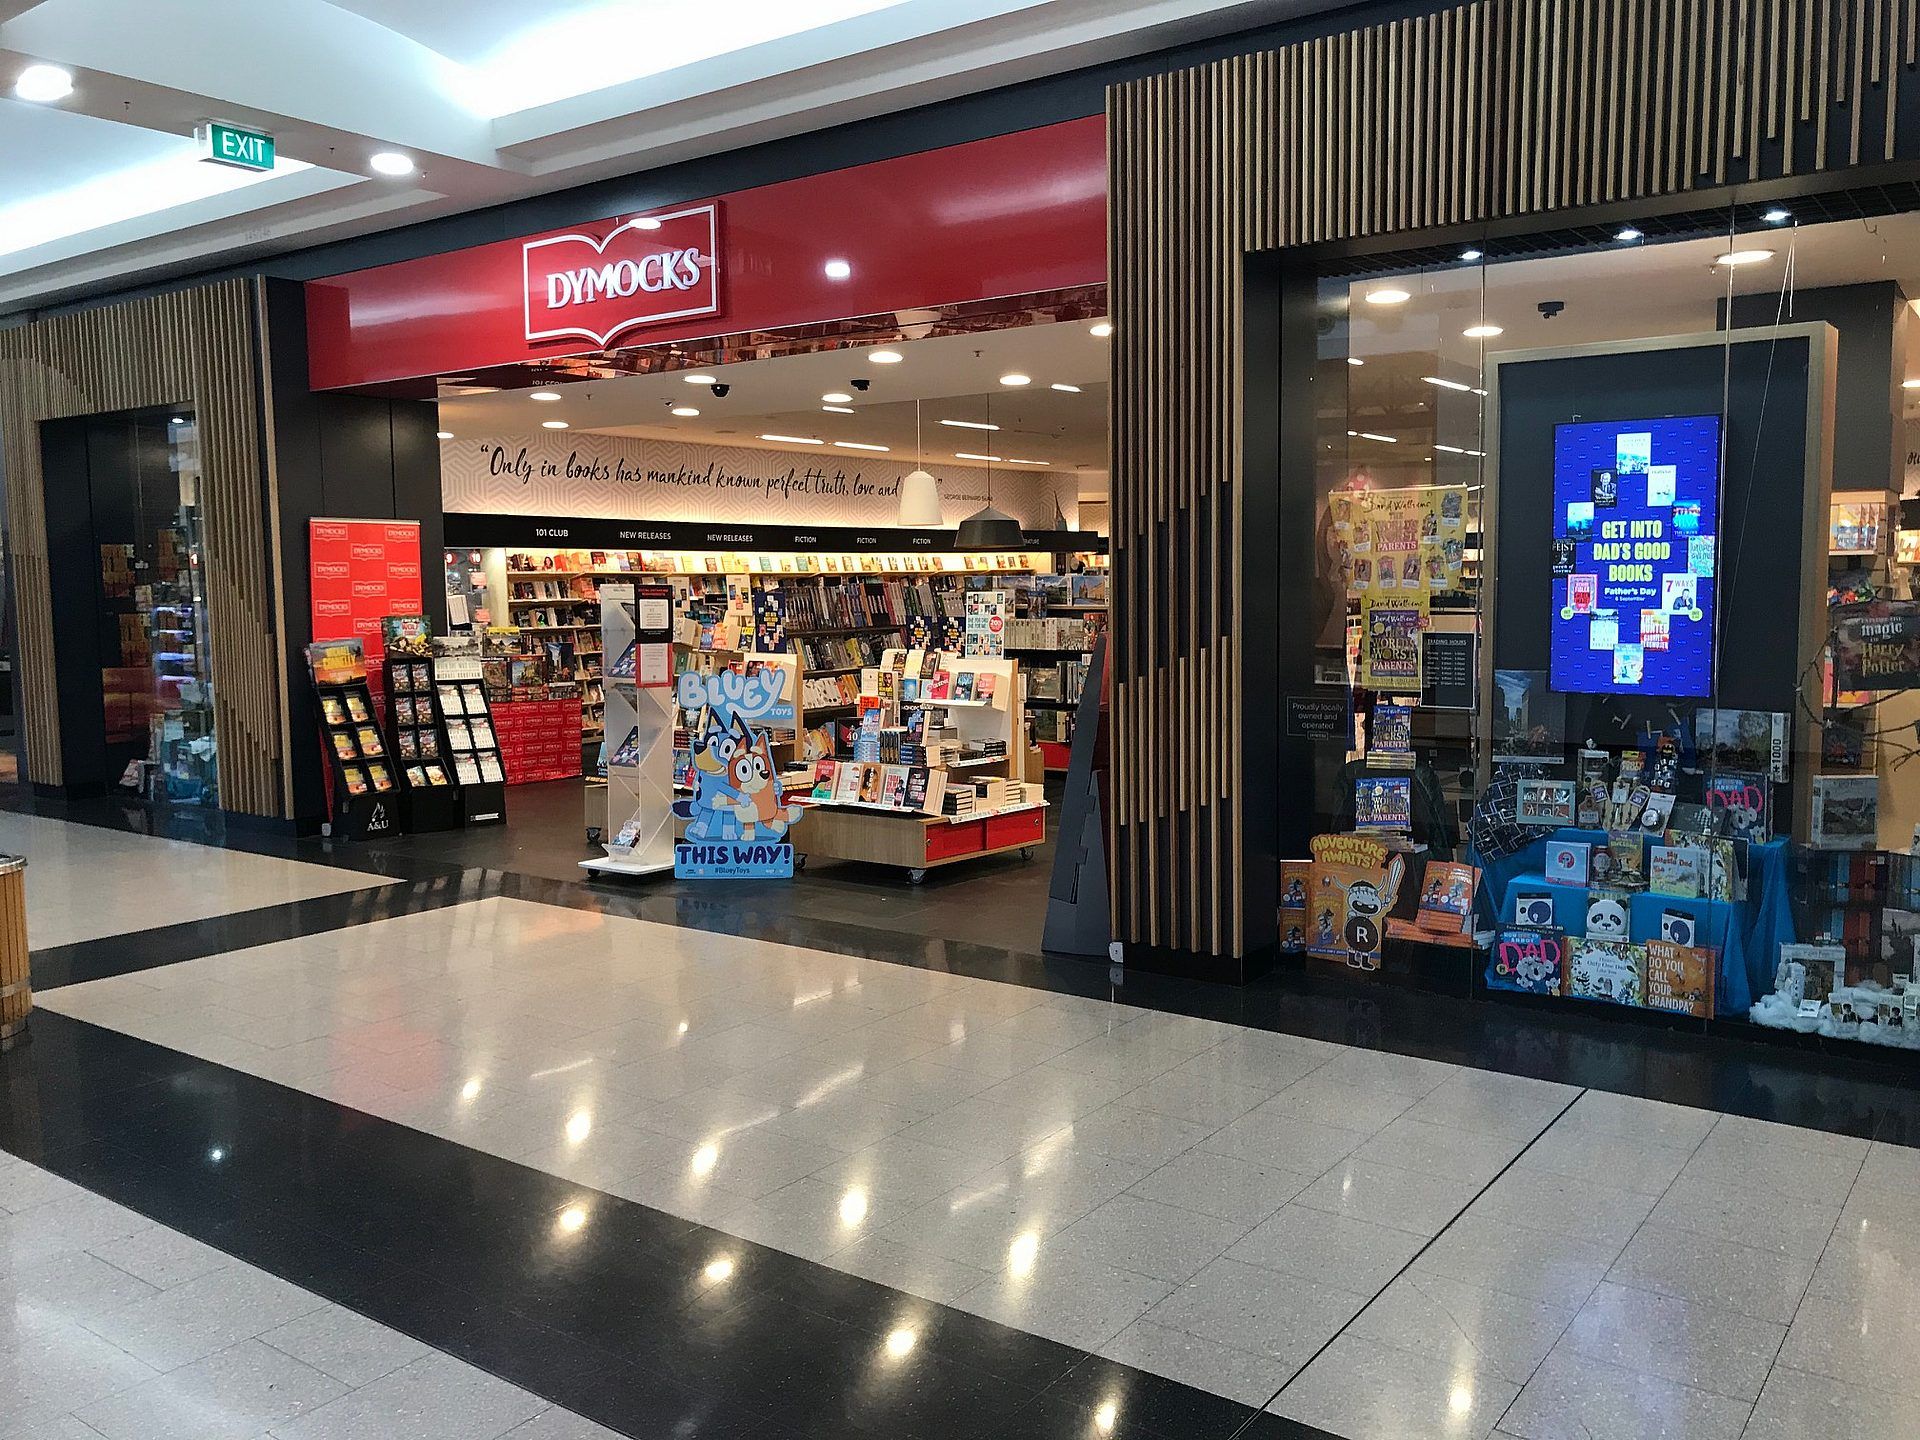 Dymocks data breach: Over 1.24M customer records exposed, but no sensitive info compromised. Stay vigilant online